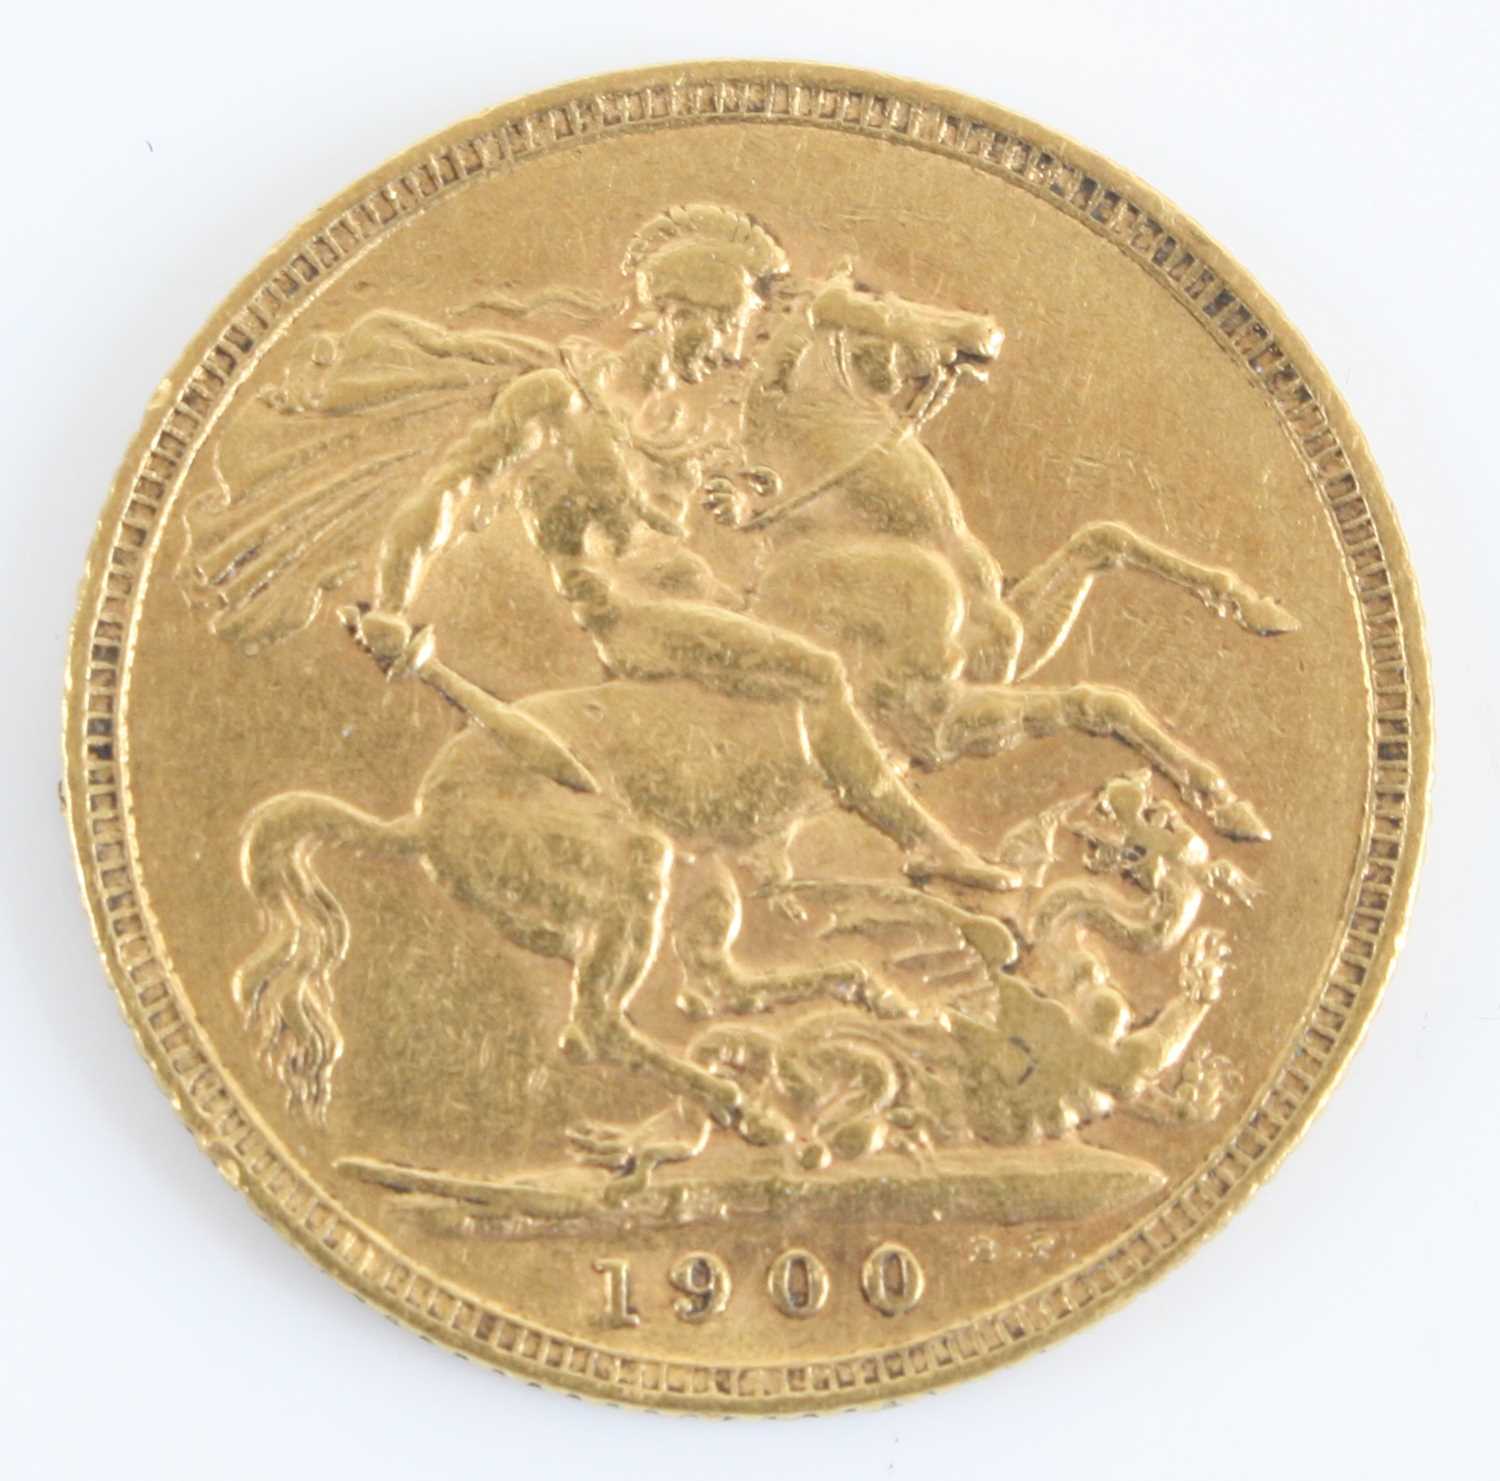 Great Britain, 1900 gold full sovereign, Victoria veiled bust, rev: St George and Dragon above date. - Image 2 of 2